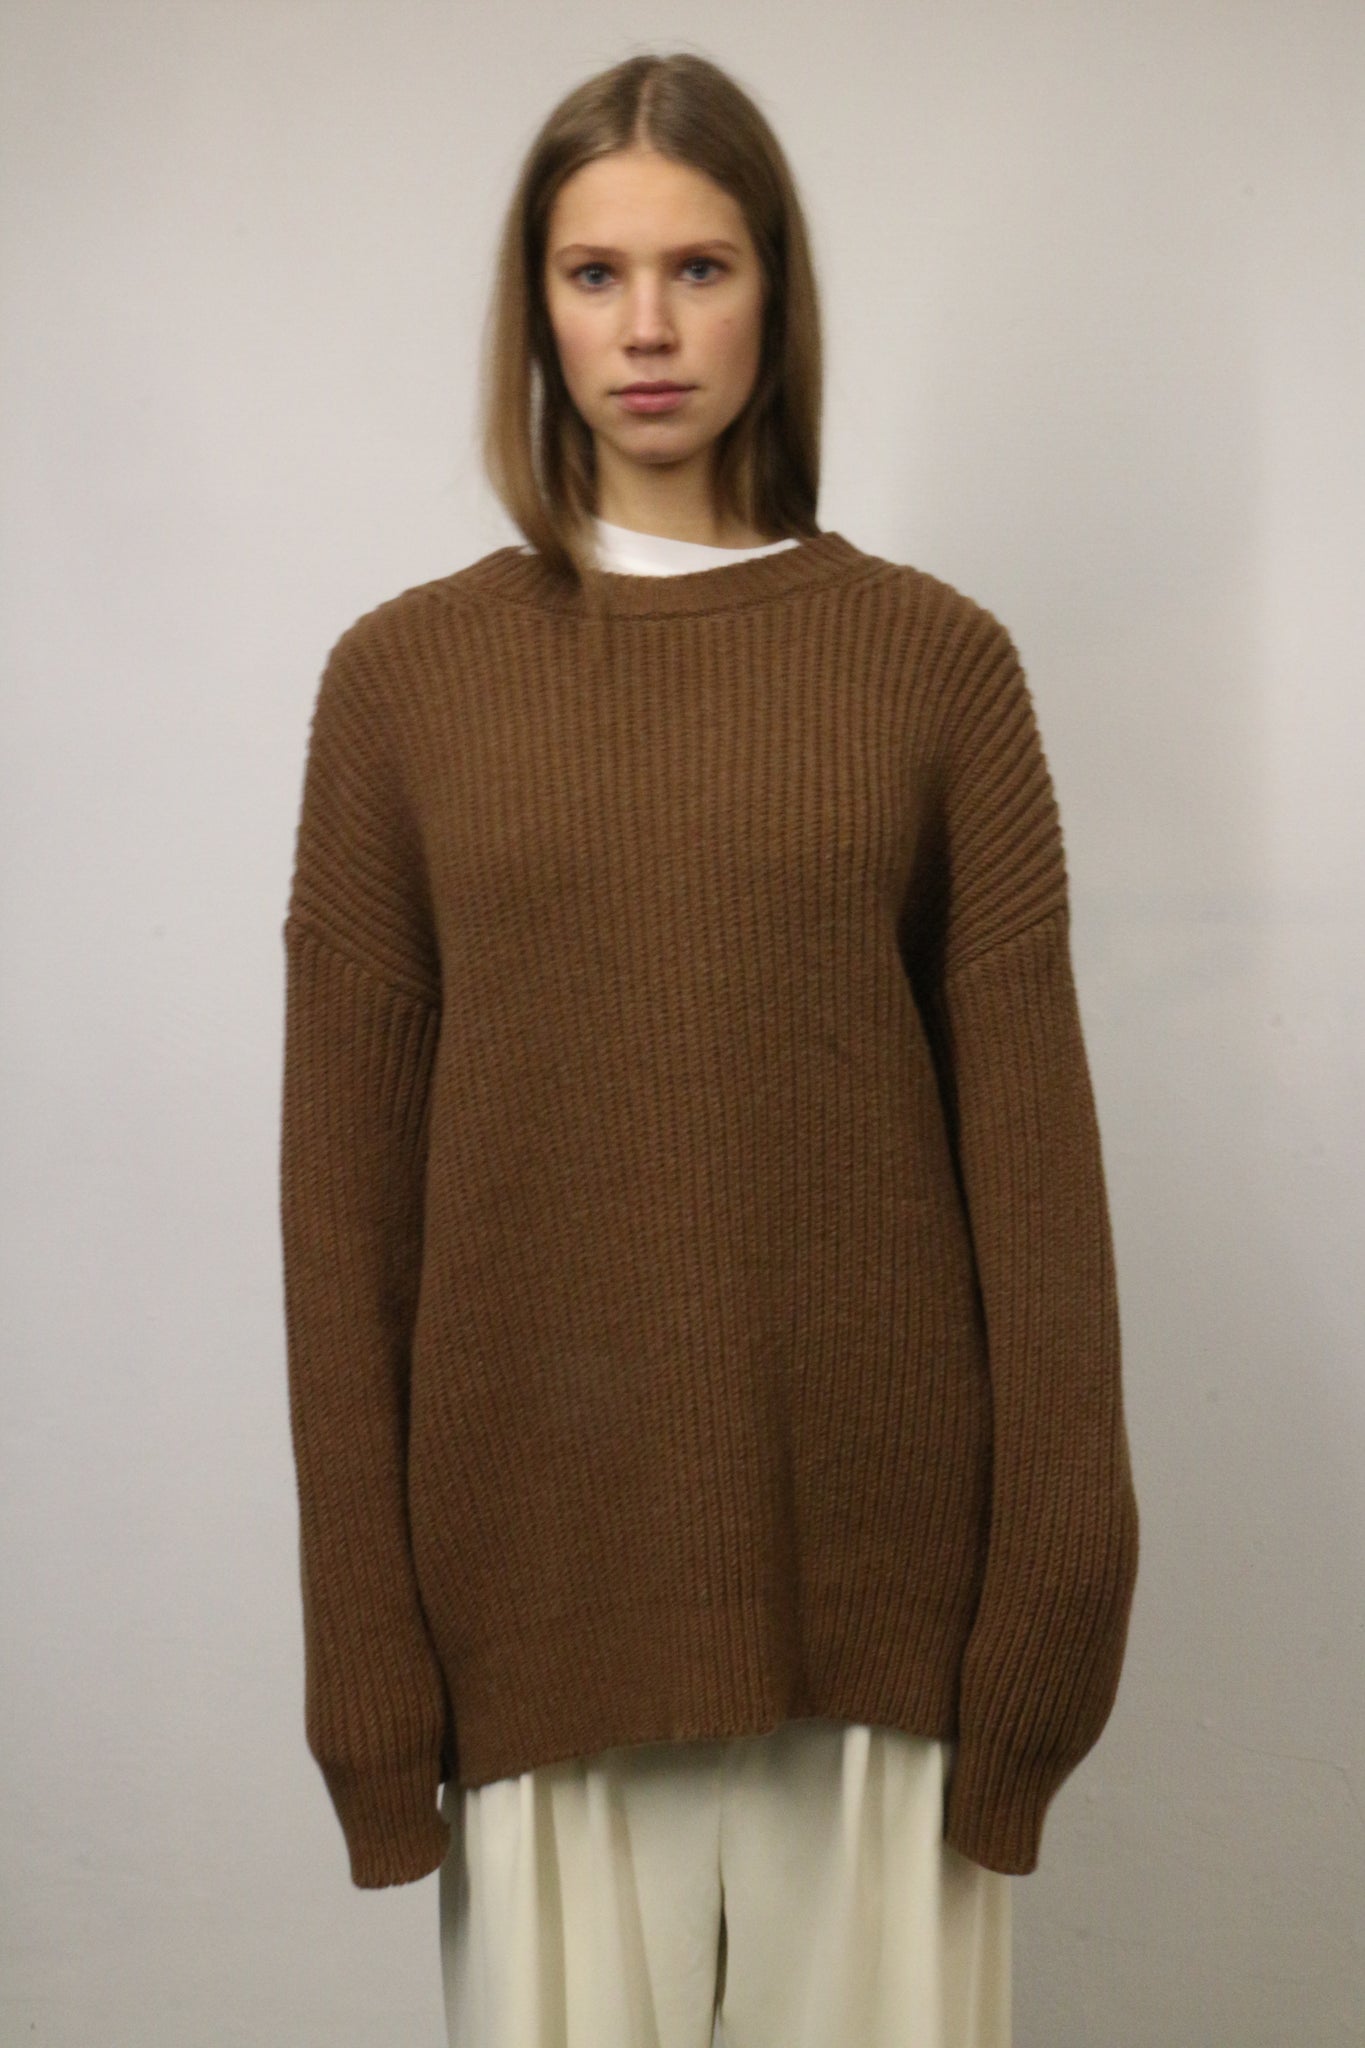 CHUNKY UNISEX KNIT PULLOVER IN BROWN BY CAN PEP REY